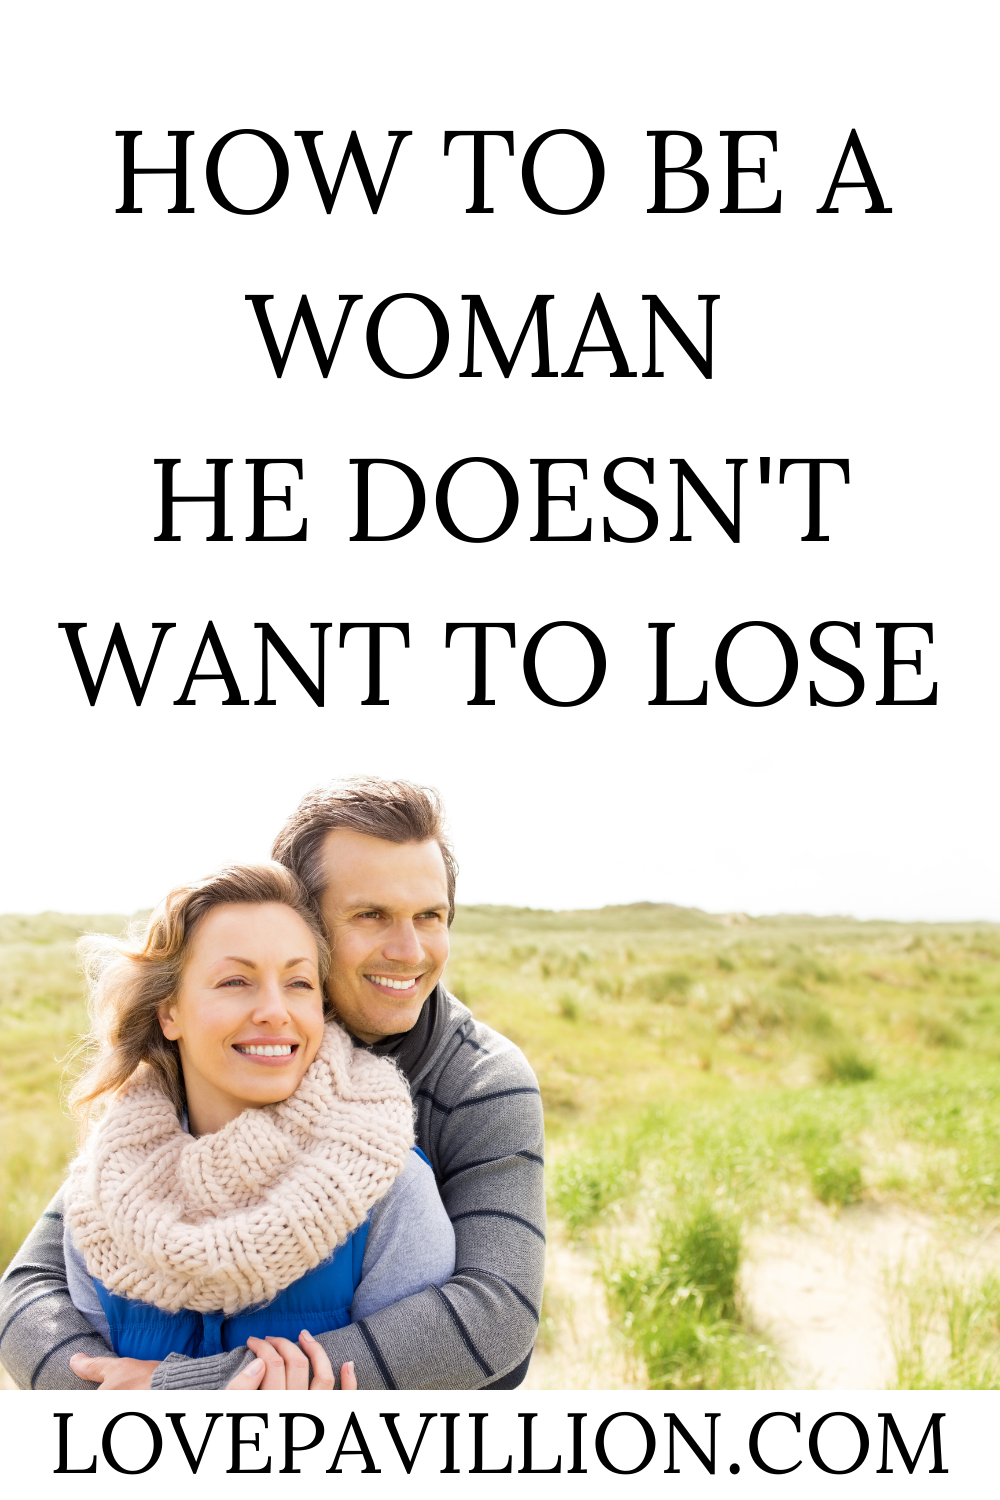 a woman he doesn't want to lose